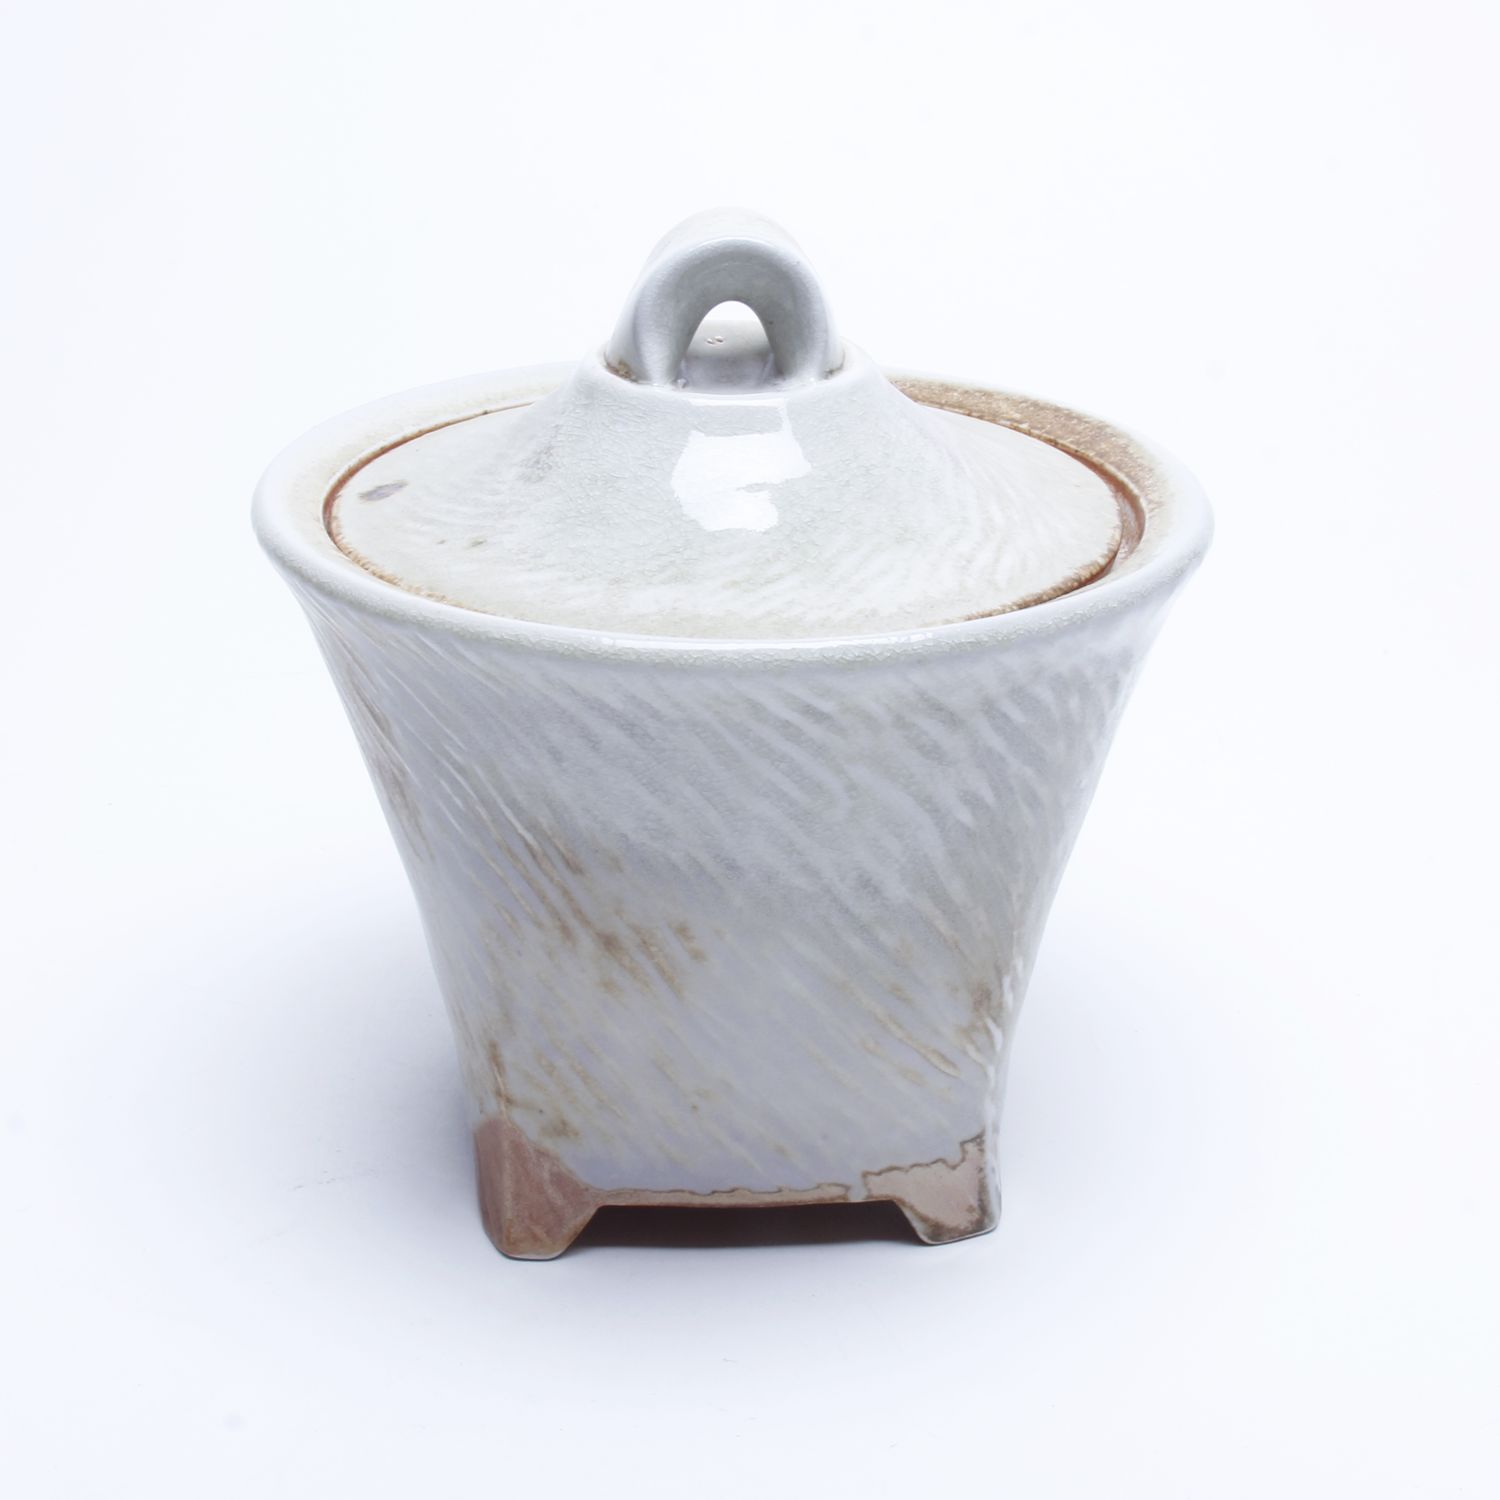 Bruce Cochrane: Tall Footed Jar Product Image 1 of 2